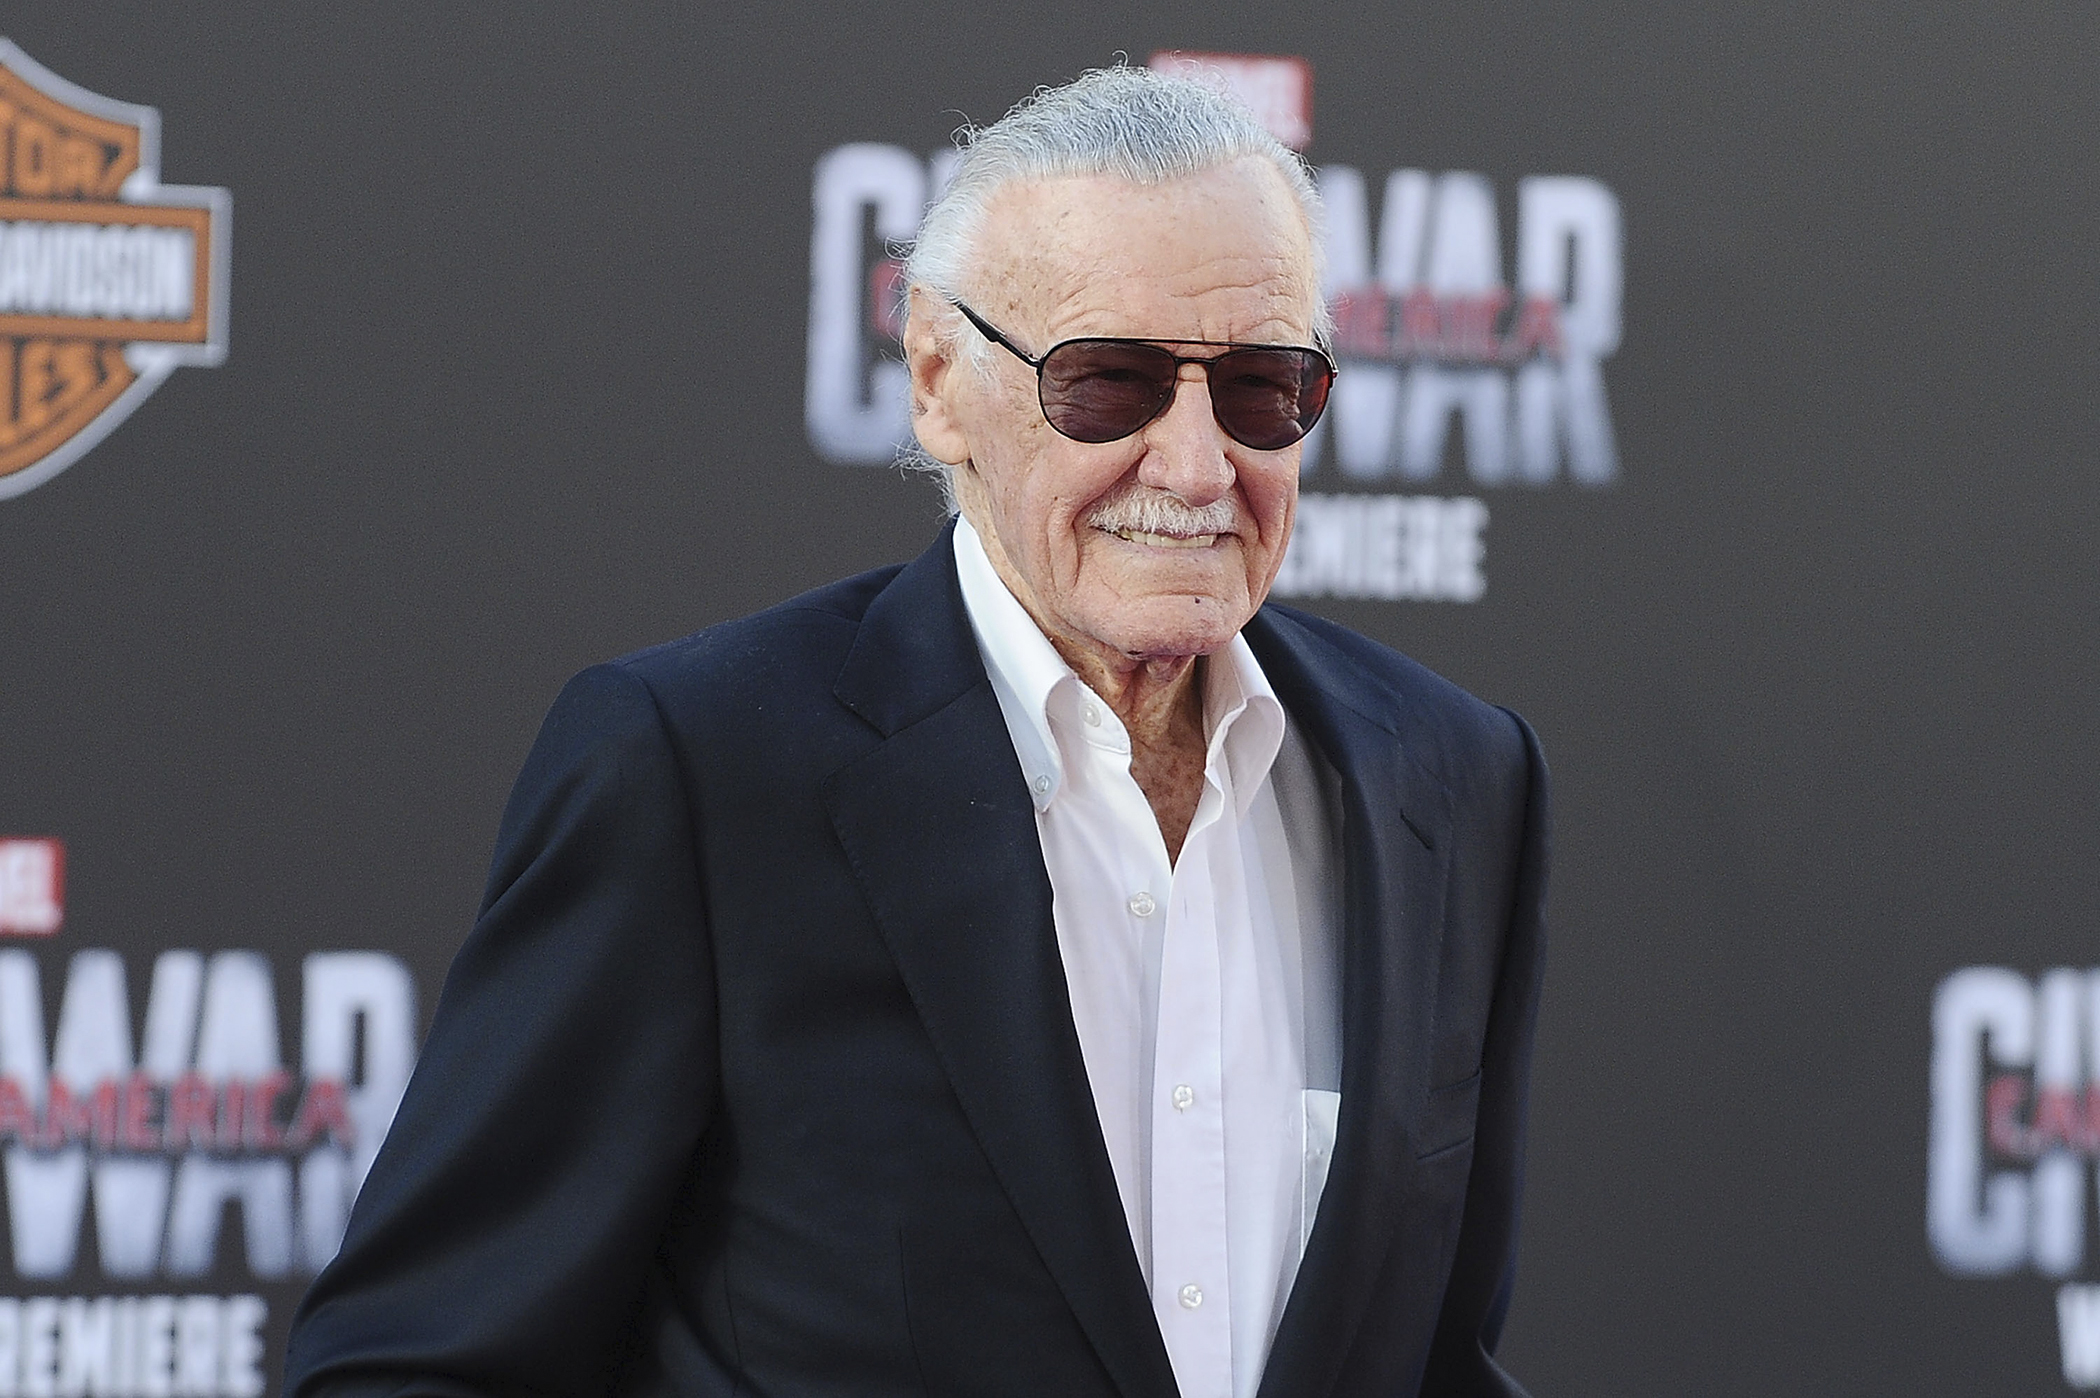 Stan Lee attends the premiere of  Captain America: Civil War  at Dolby Theatre on April 12, 2016 in Hollywood, California.